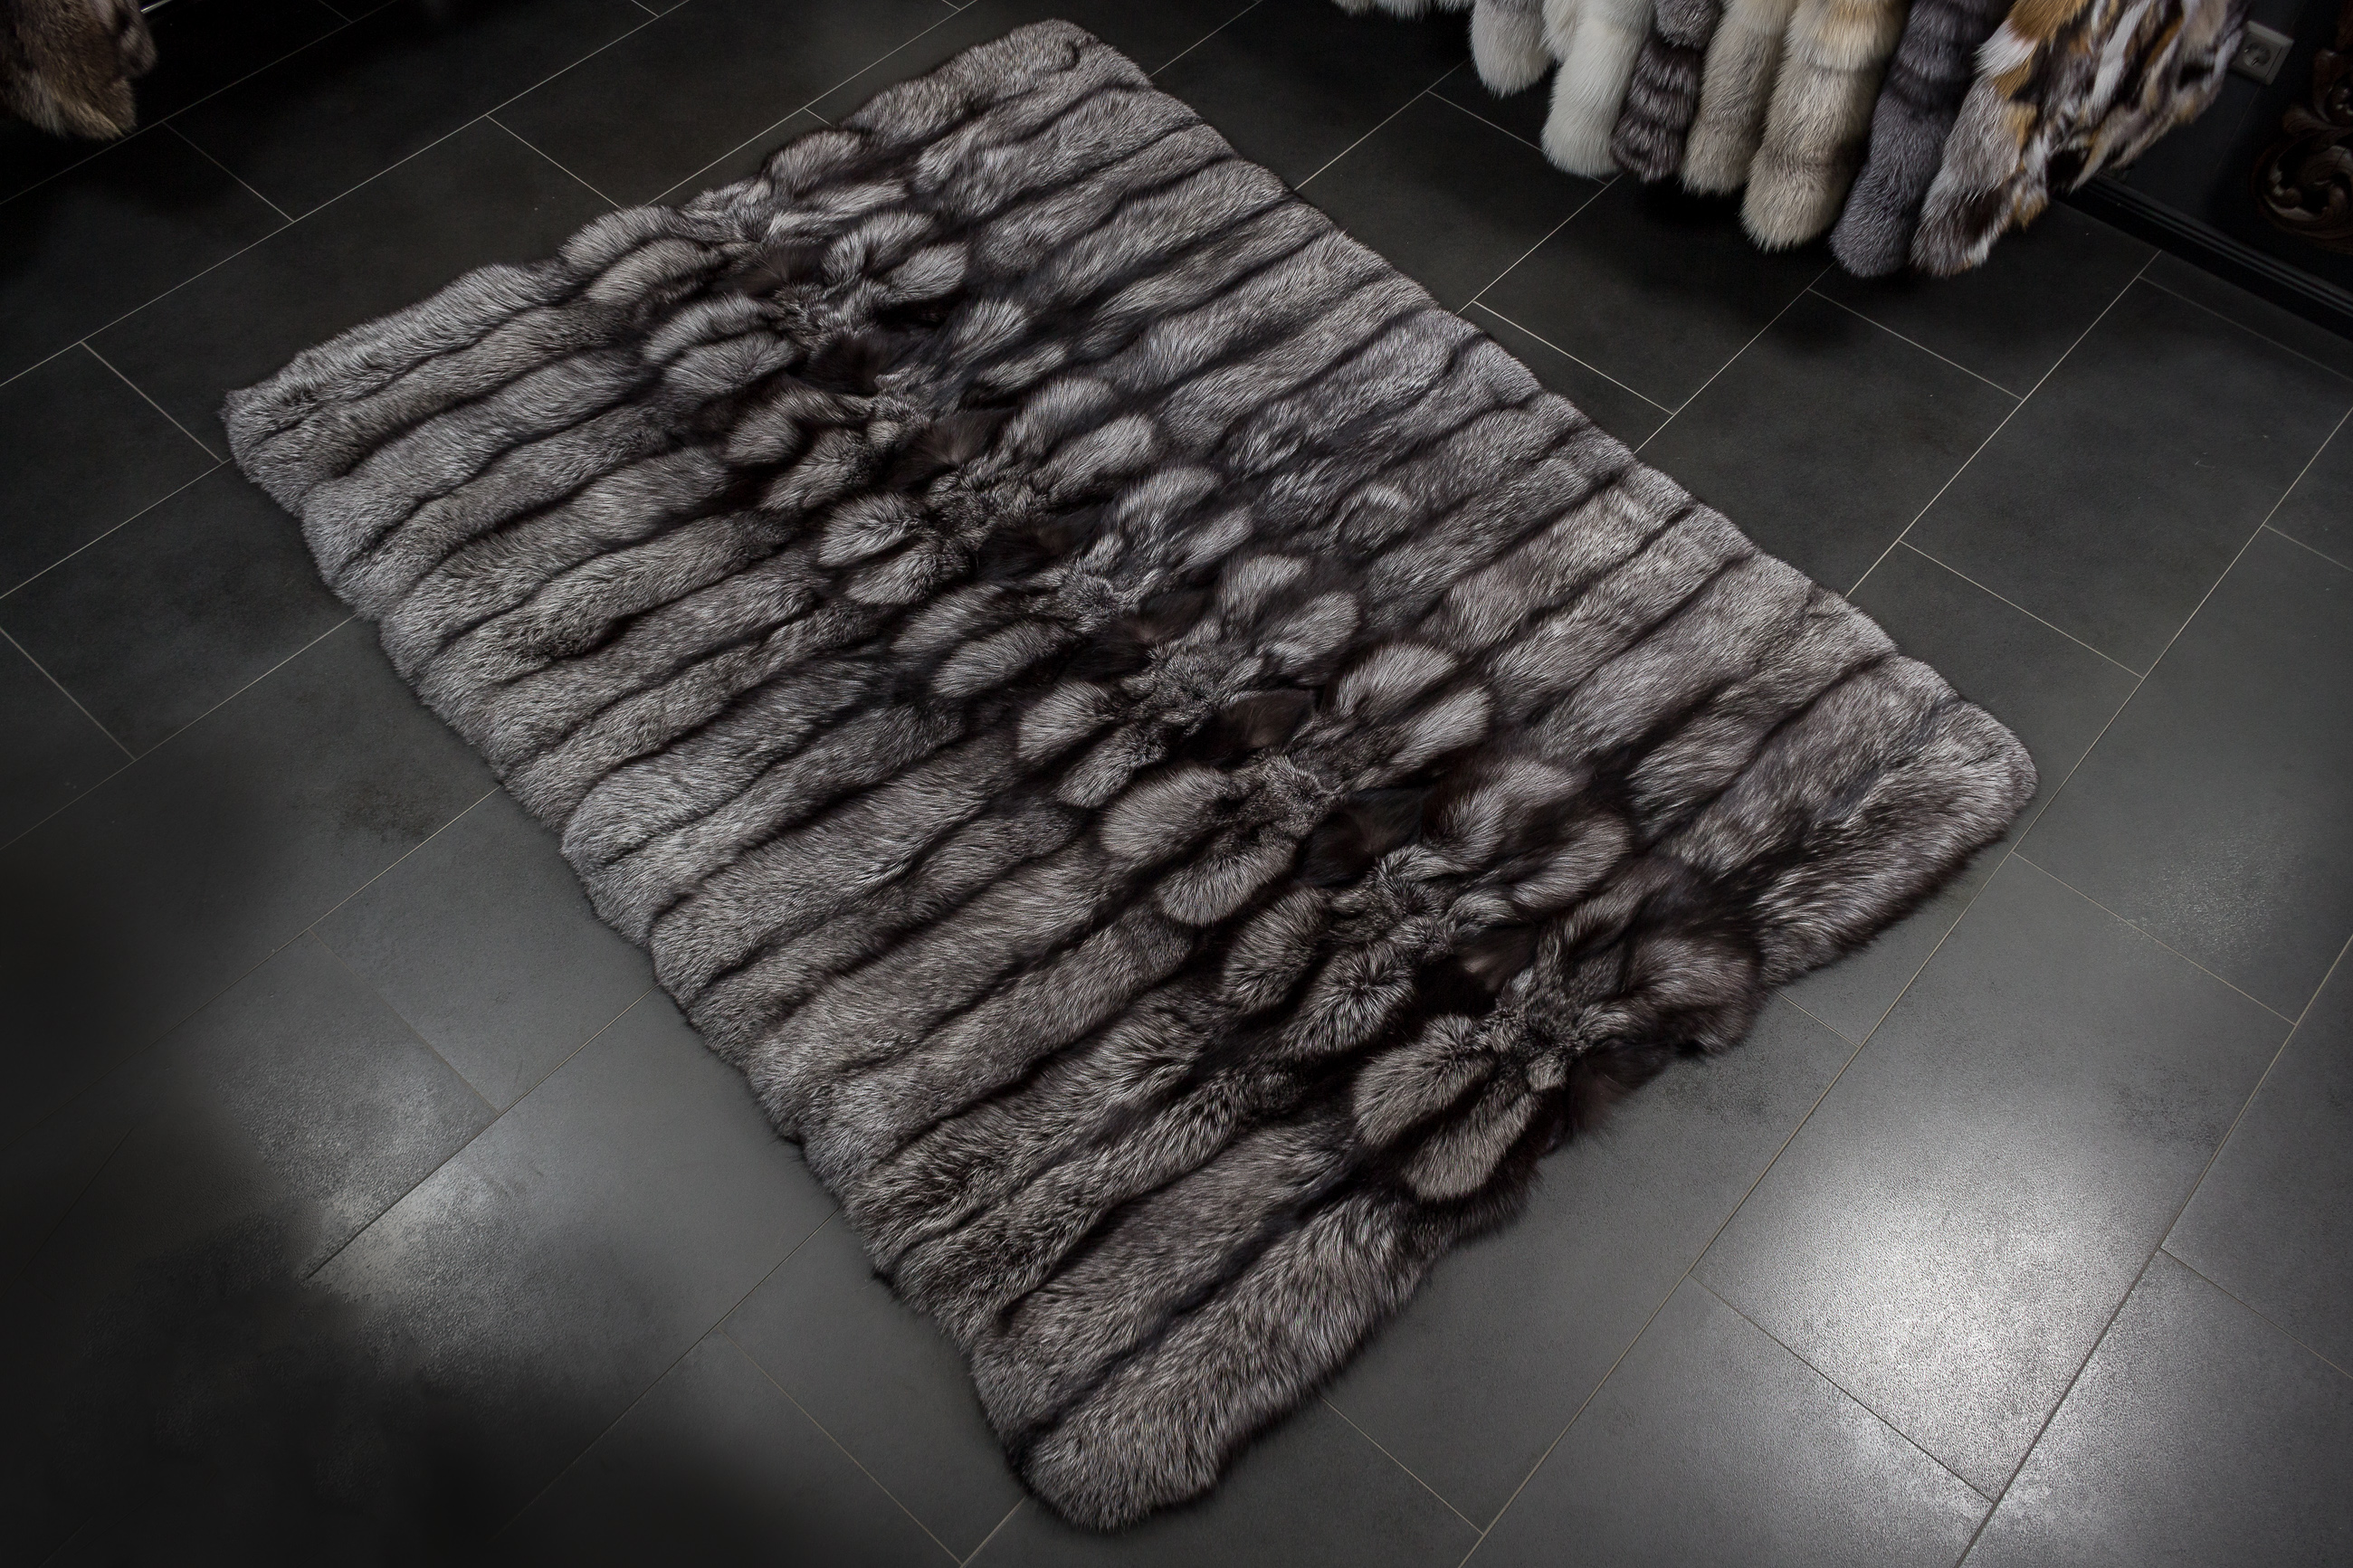 Fur Rug made with Scandinavian Silver Foxes